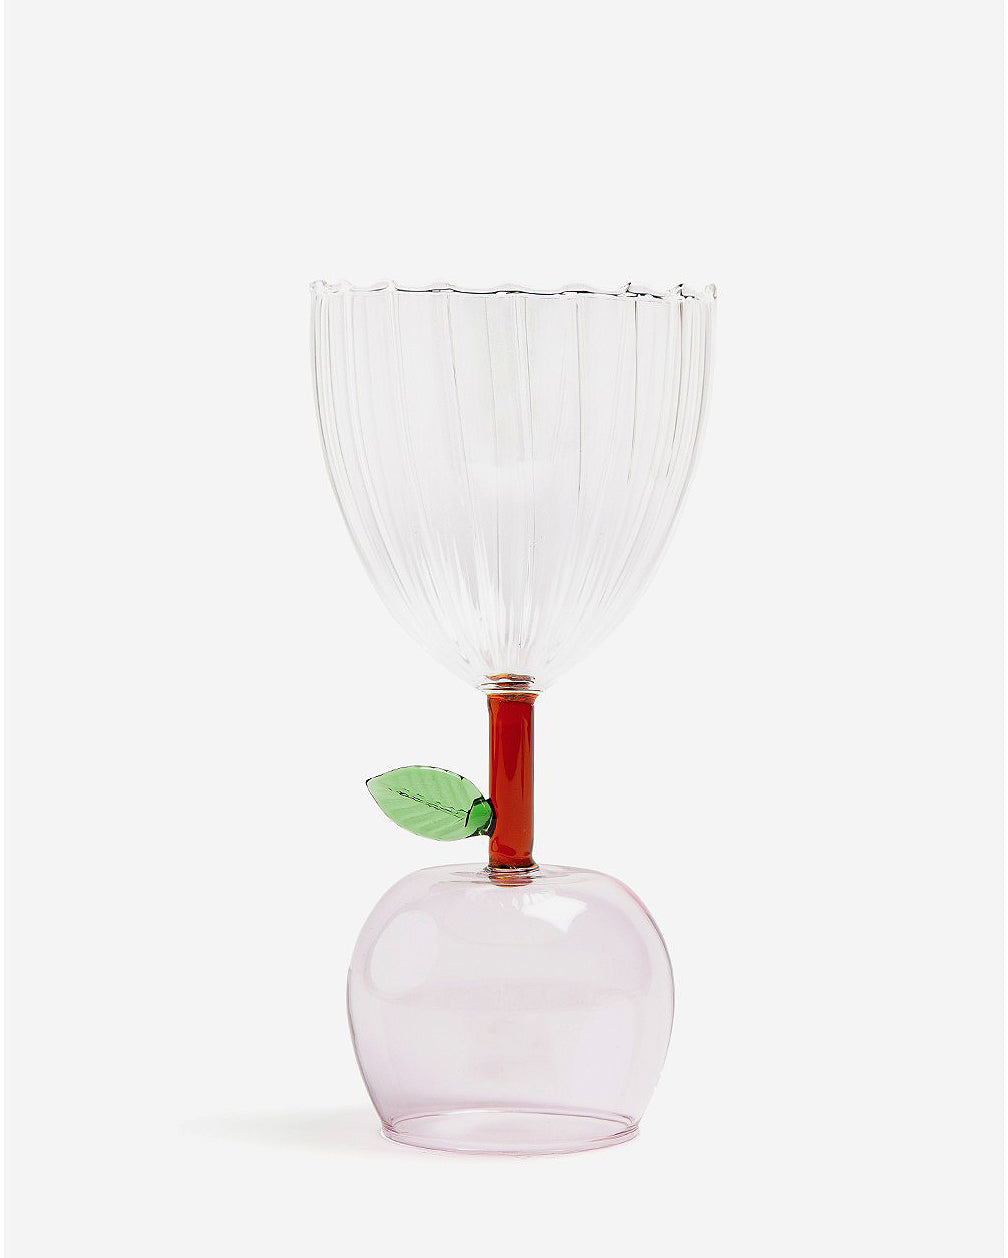 Pink Apple Shaped Wine Glass or Goblet